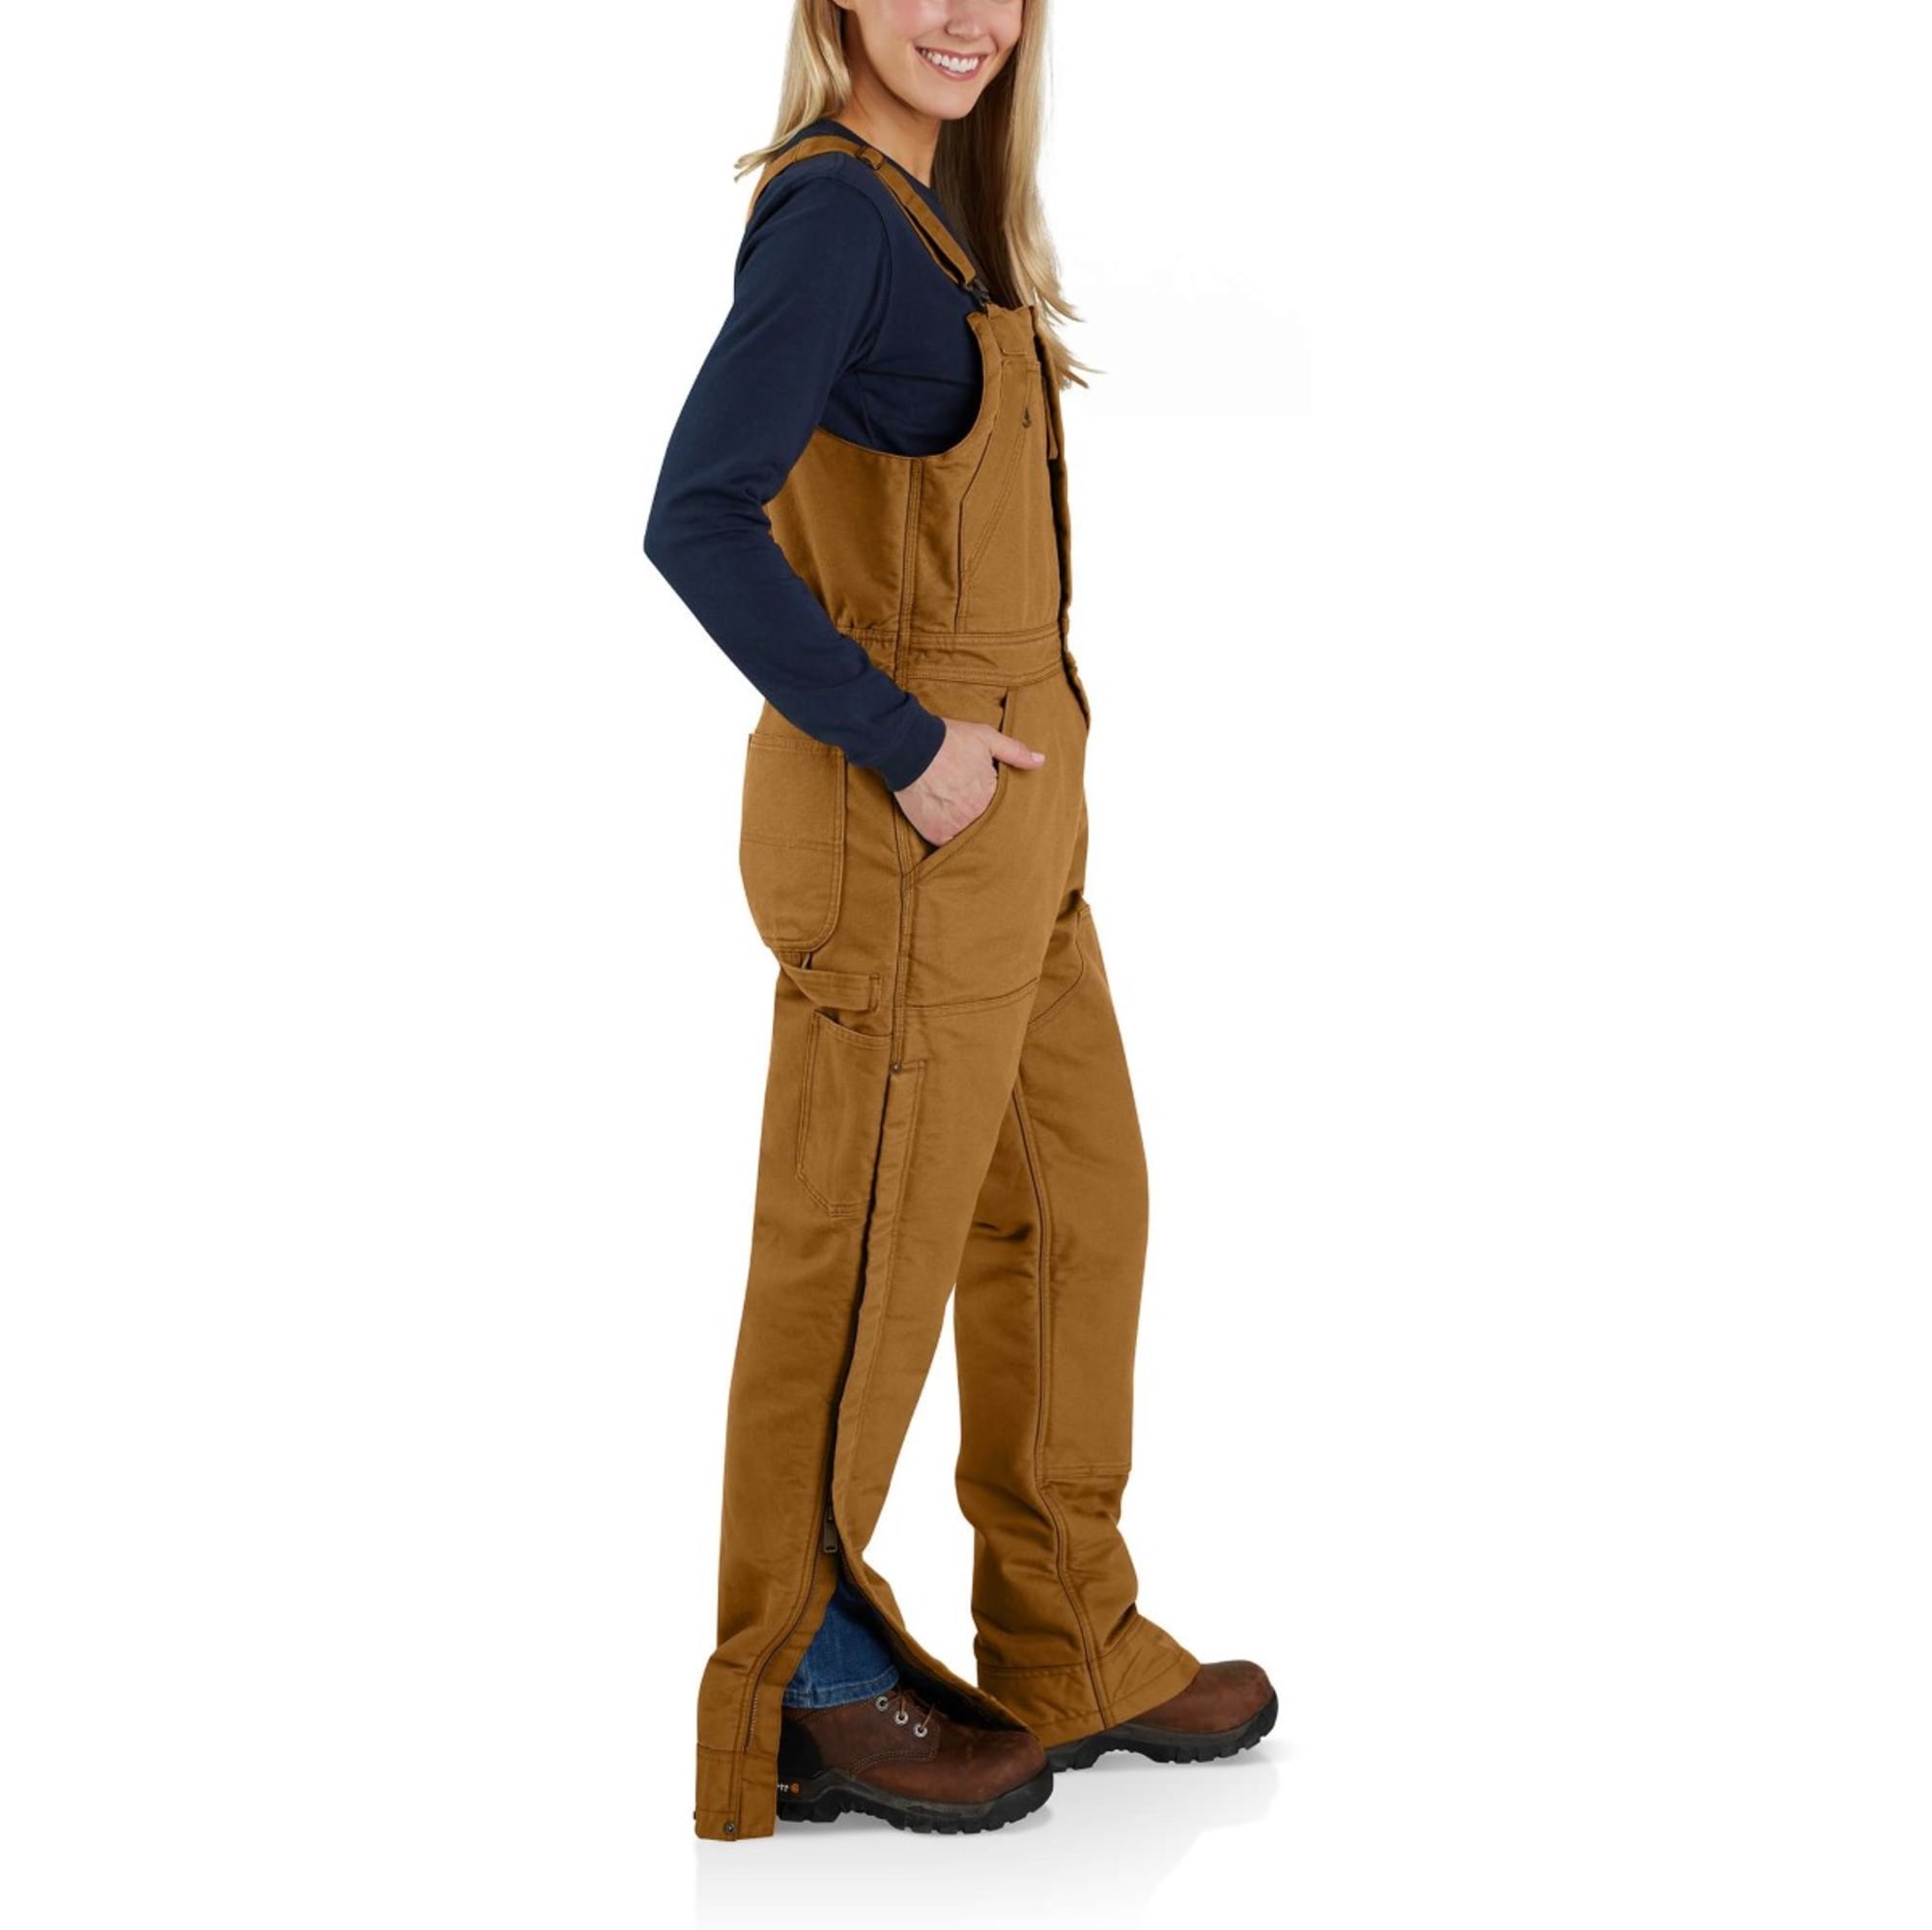 Carhartt 104049-BRN Relaxed Fit Washed Duck Insulated Bib Overalls